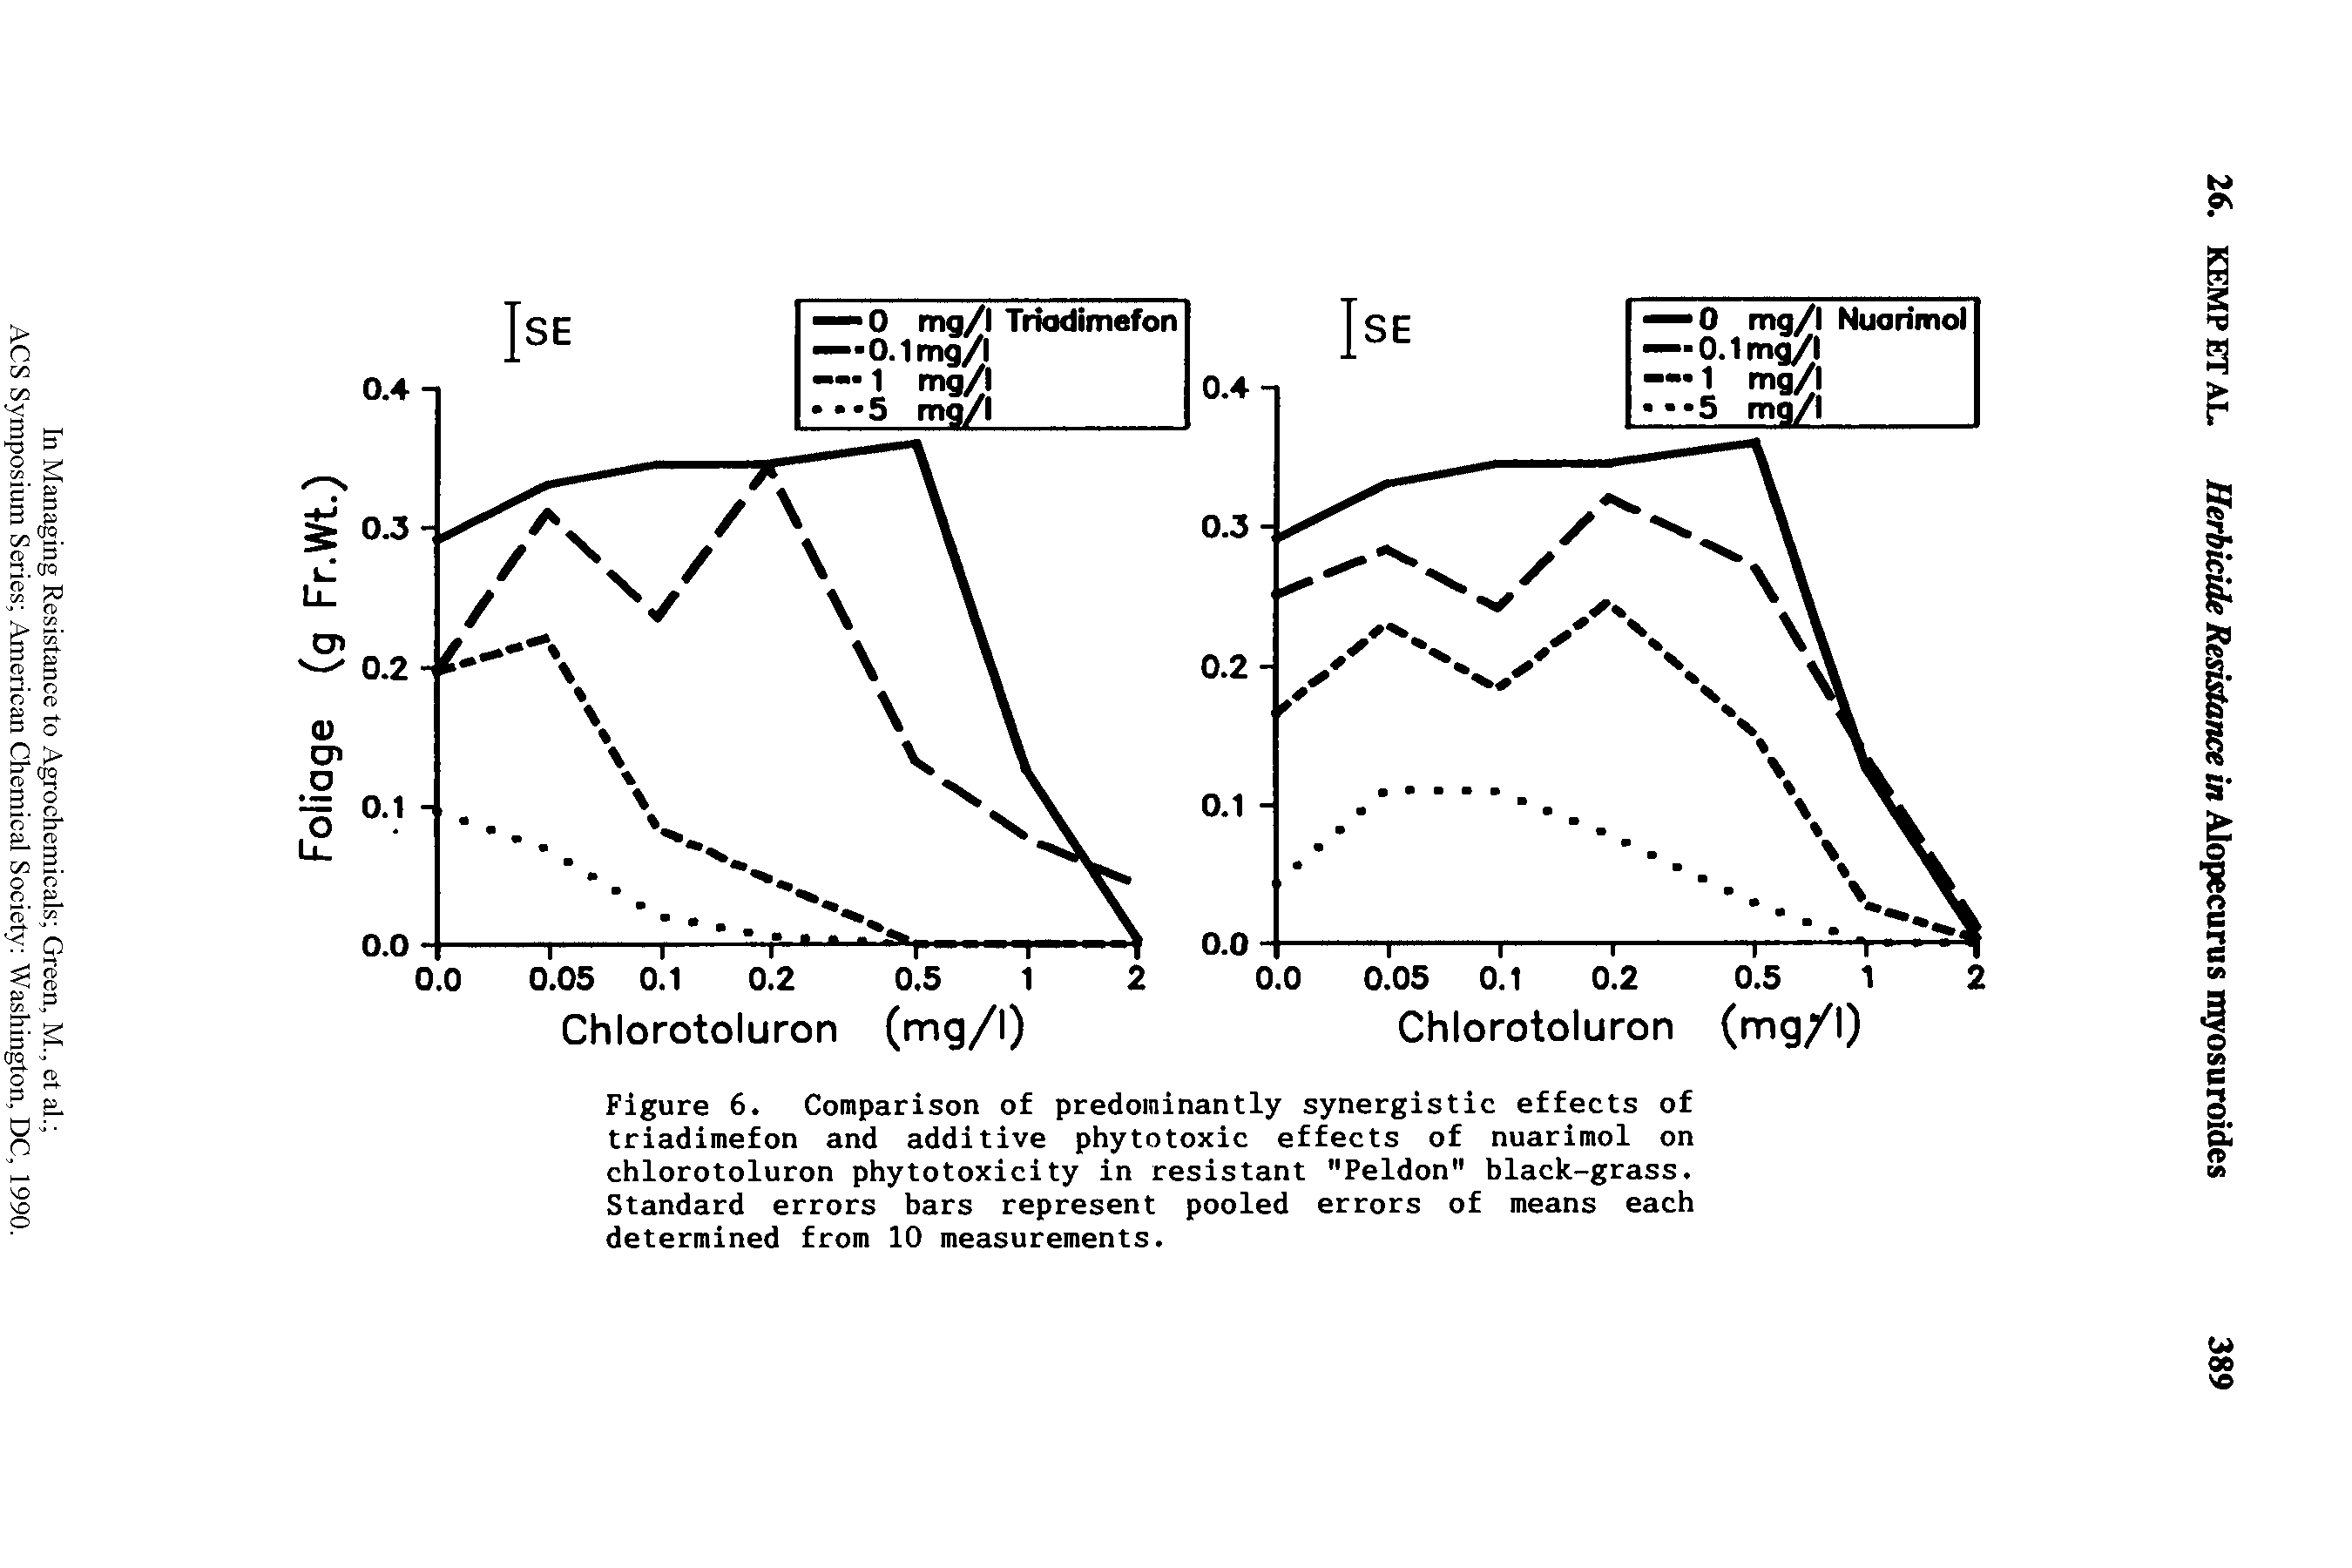 Figure 6. Comparison of predominantly synergistic effects of triadimefon and additive phytotoxic effects of nuarimol on chlorotoluron phytotoxicity in resistant "Peldon" black-grass. Standard errors bars represent pooled errors of means each determined from 10 measurements.